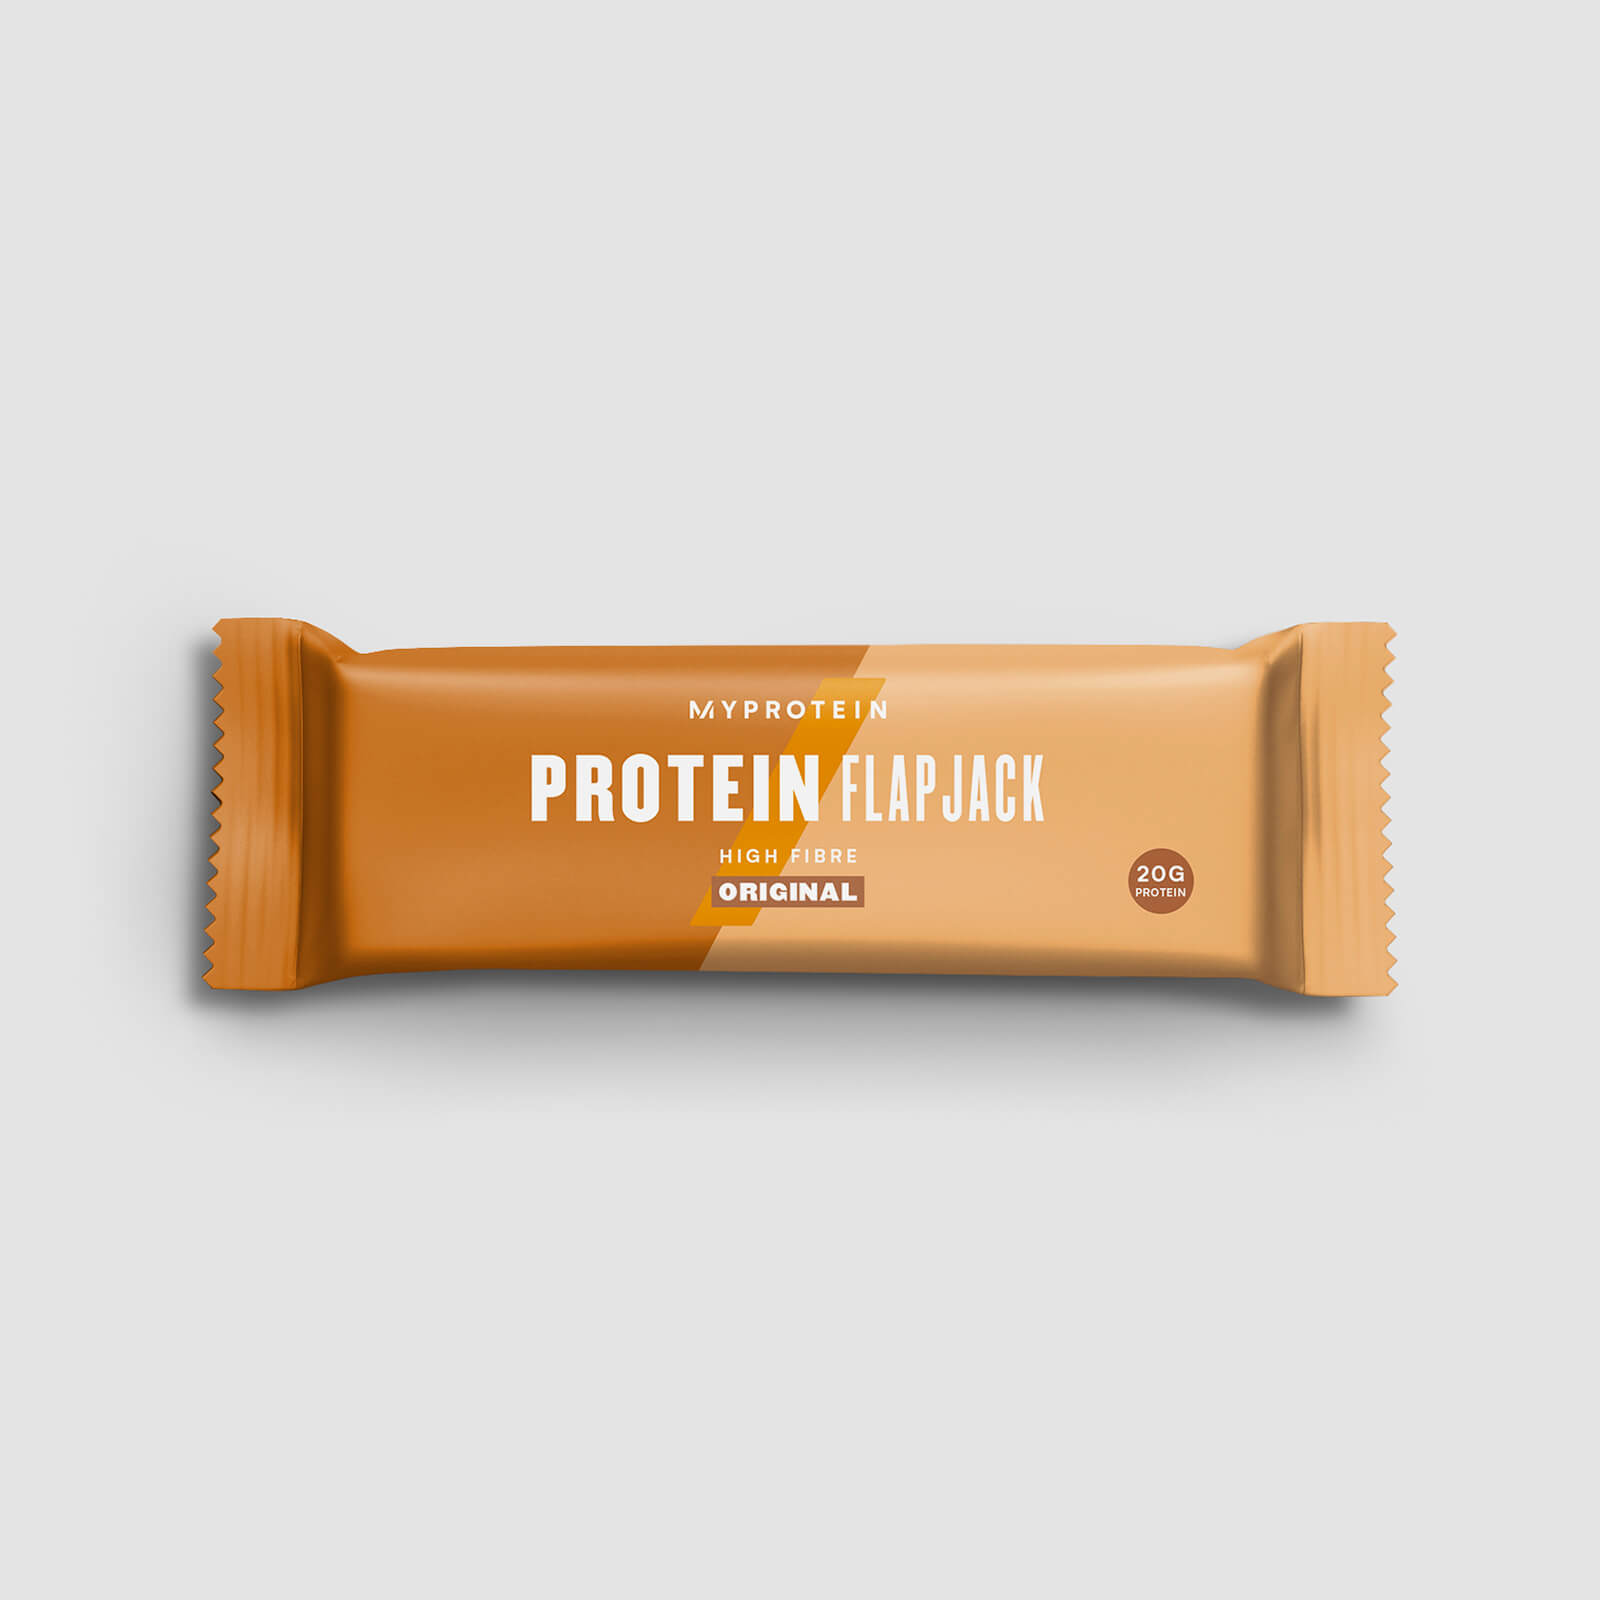 Protein Flapjack (Sample) - 80g - Traditional Oat